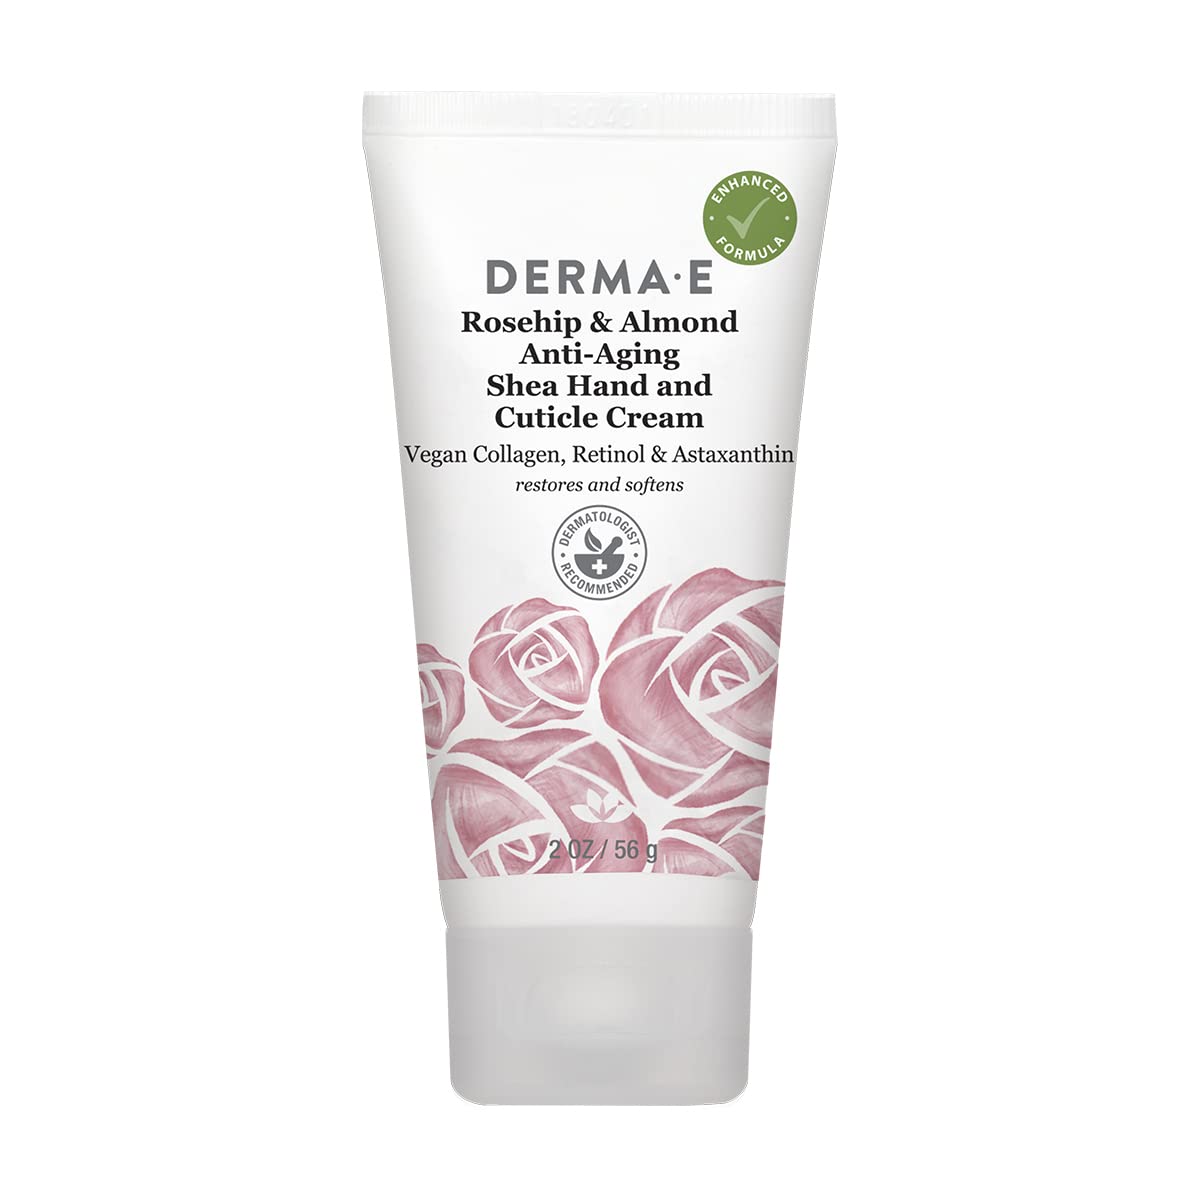 DERMA-E Rosehip and Almond Anti-Aging Shea Hand and Cuticle Cream – Vegan Collagen, Retinol and Vitamin E Moisturizer for Dry Skin – Cruelty Free Hand Lotion, 2 oz : Beauty & Personal Care